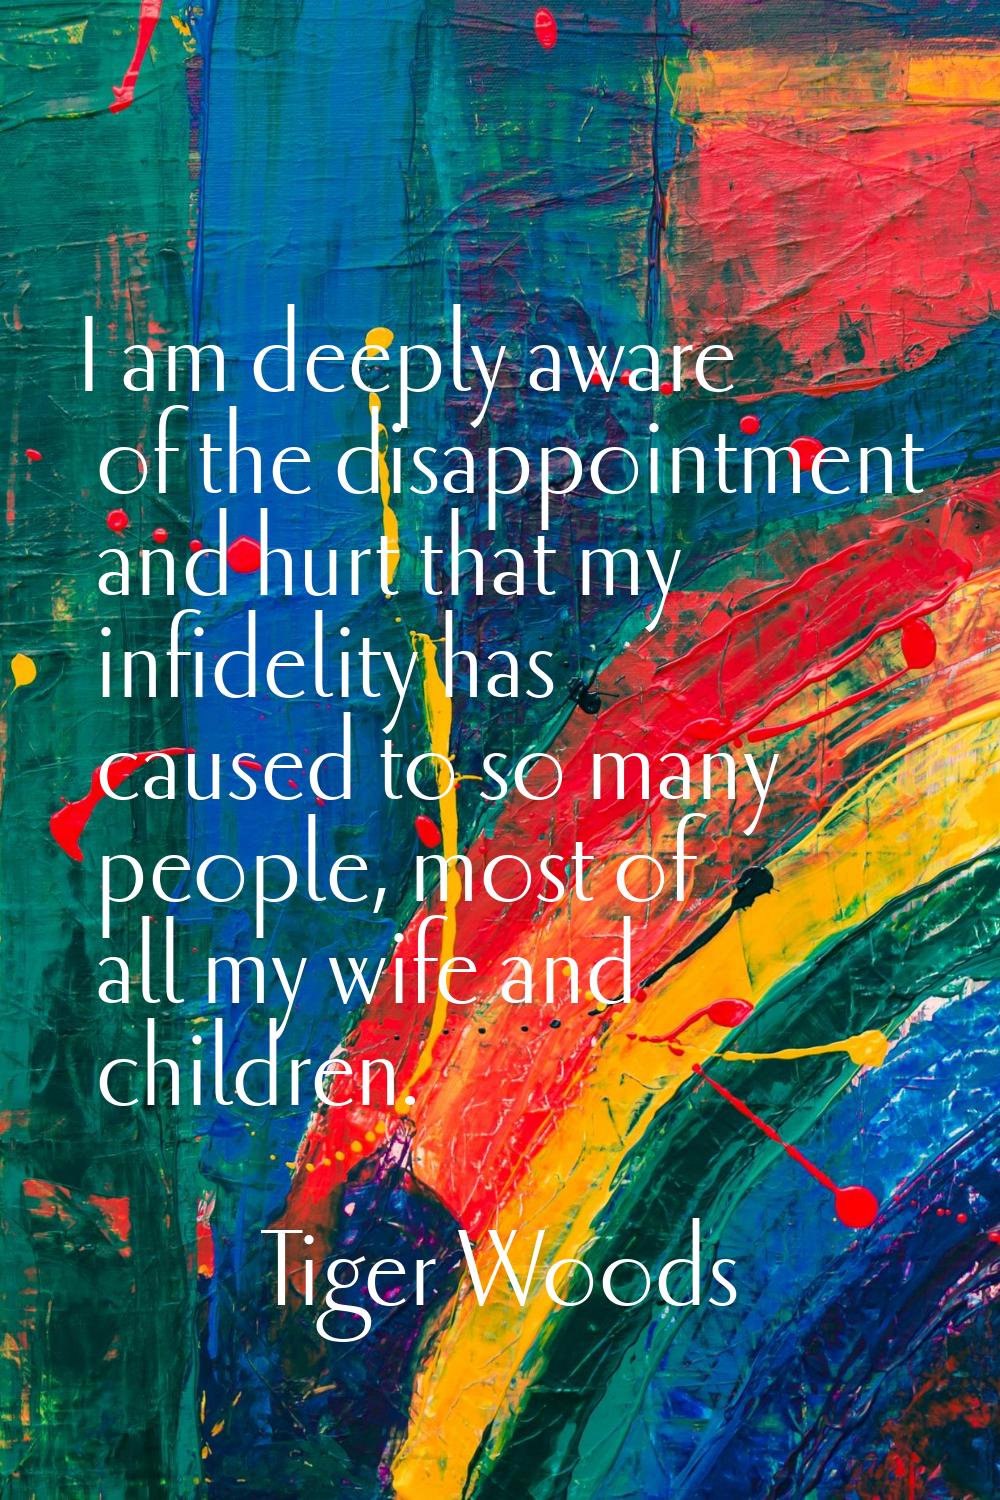 I am deeply aware of the disappointment and hurt that my infidelity has caused to so many people, m